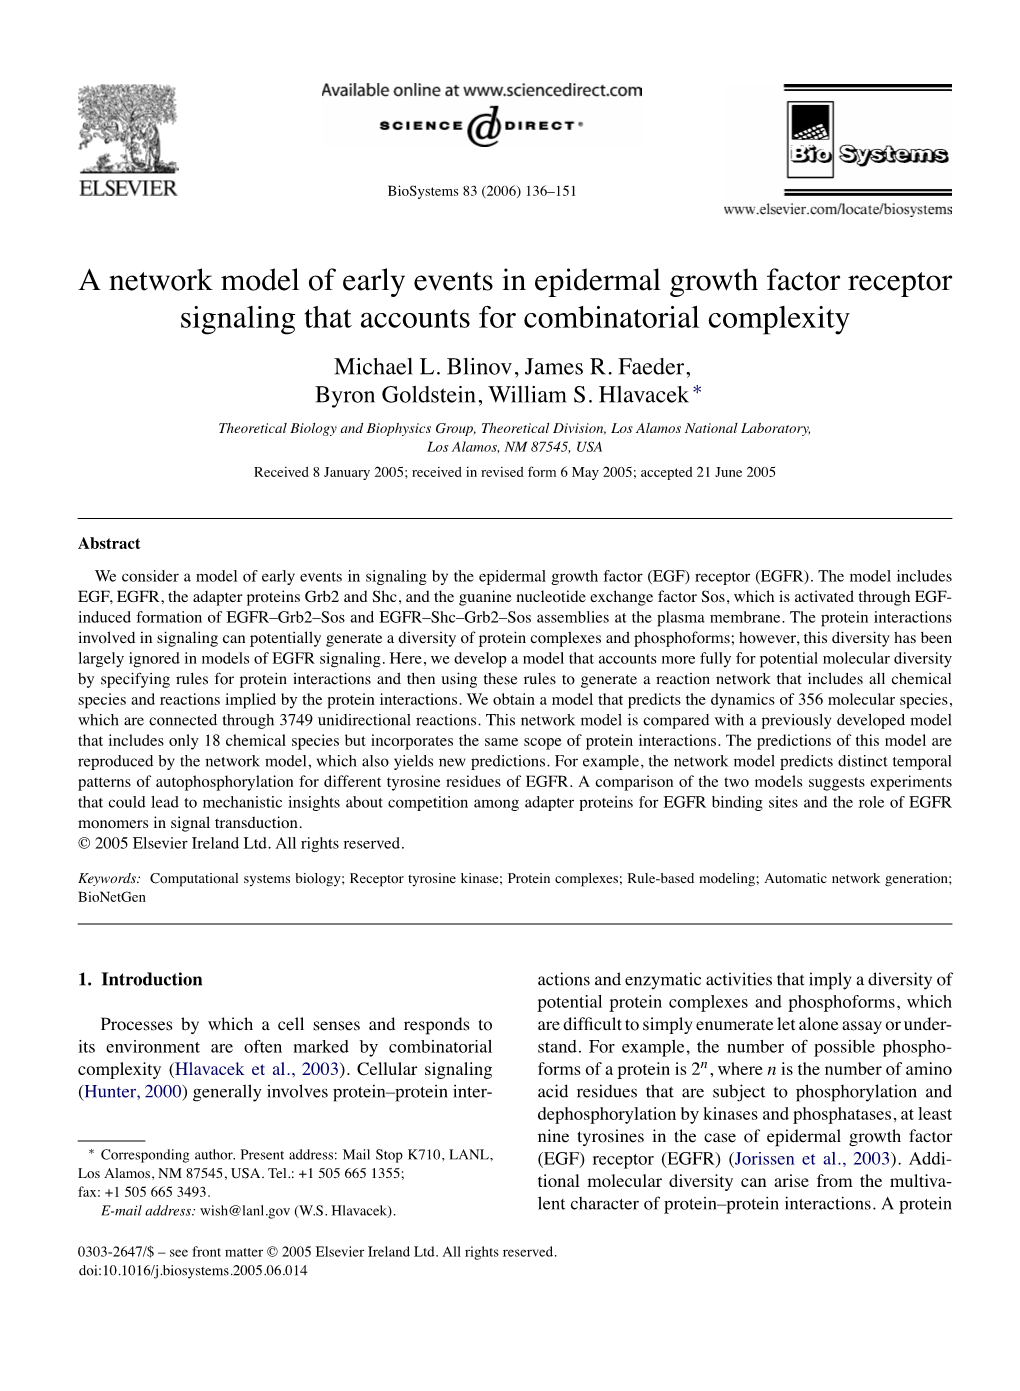 A Network Model of Early Events in Epidermal Growth Factor Receptor Signaling That Accounts for Combinatorial Complexity Michael L